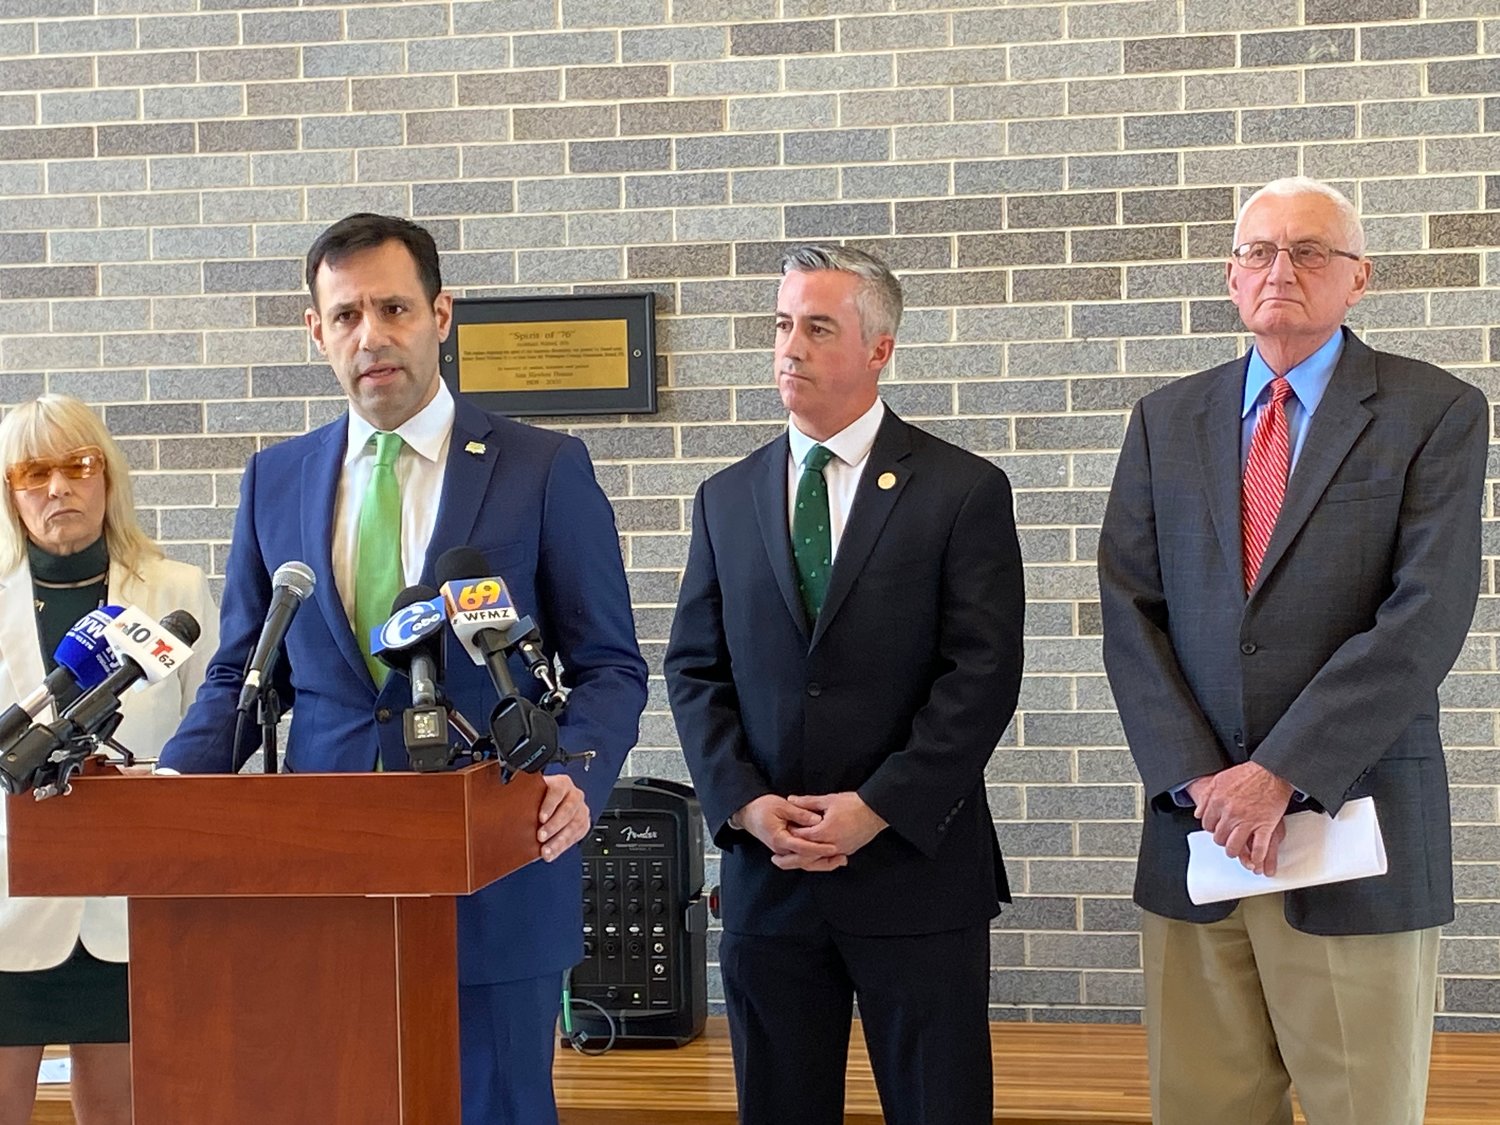 Bucks County Solicitor Joe Khan announced Wednesday that the county is joining a class action lawsuit against several social media companies for fueling the mental health crisis of youth across the county and the nation.

From left, behind Khan, Bucks County Commissioners Diane Ellis-Marseglia, commission chairman Bob Harvie and Gene DiGirolamo.